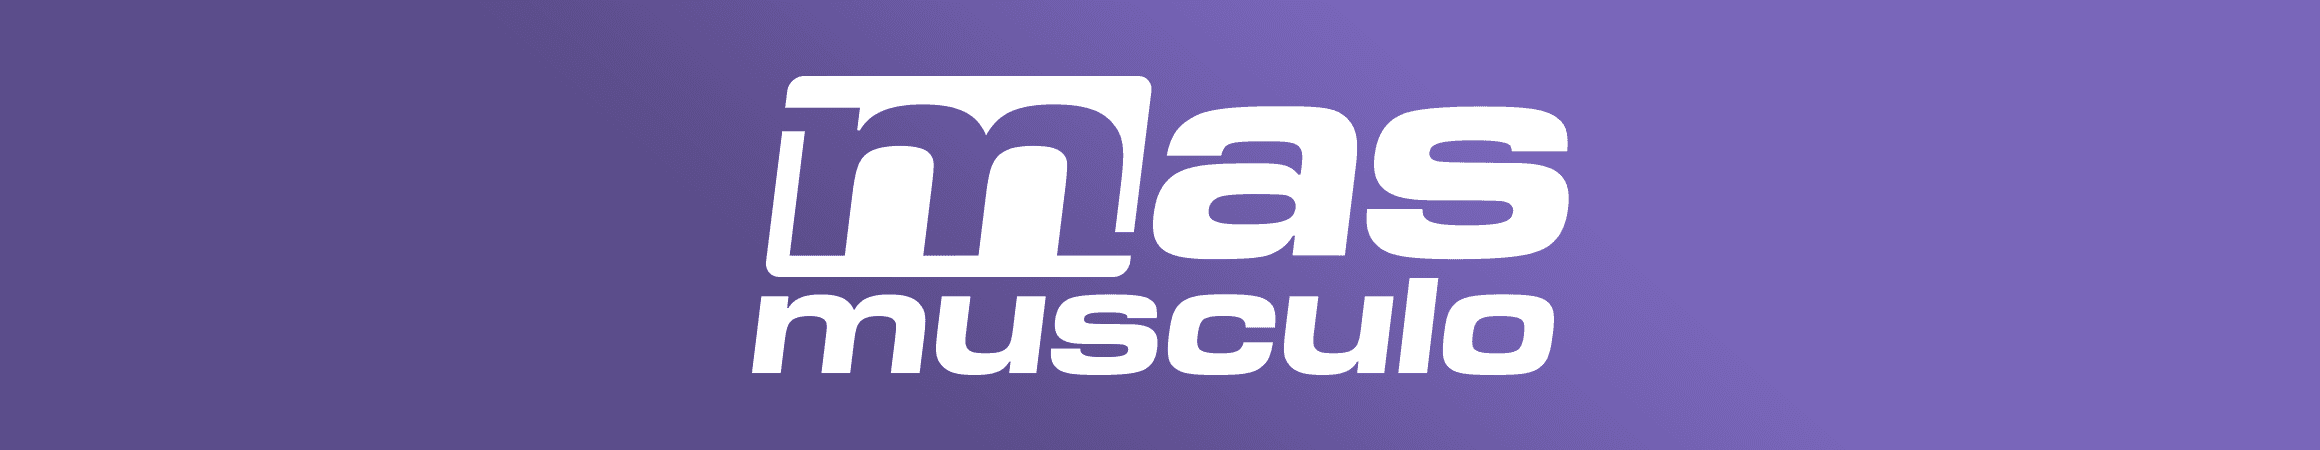 MASmusculo